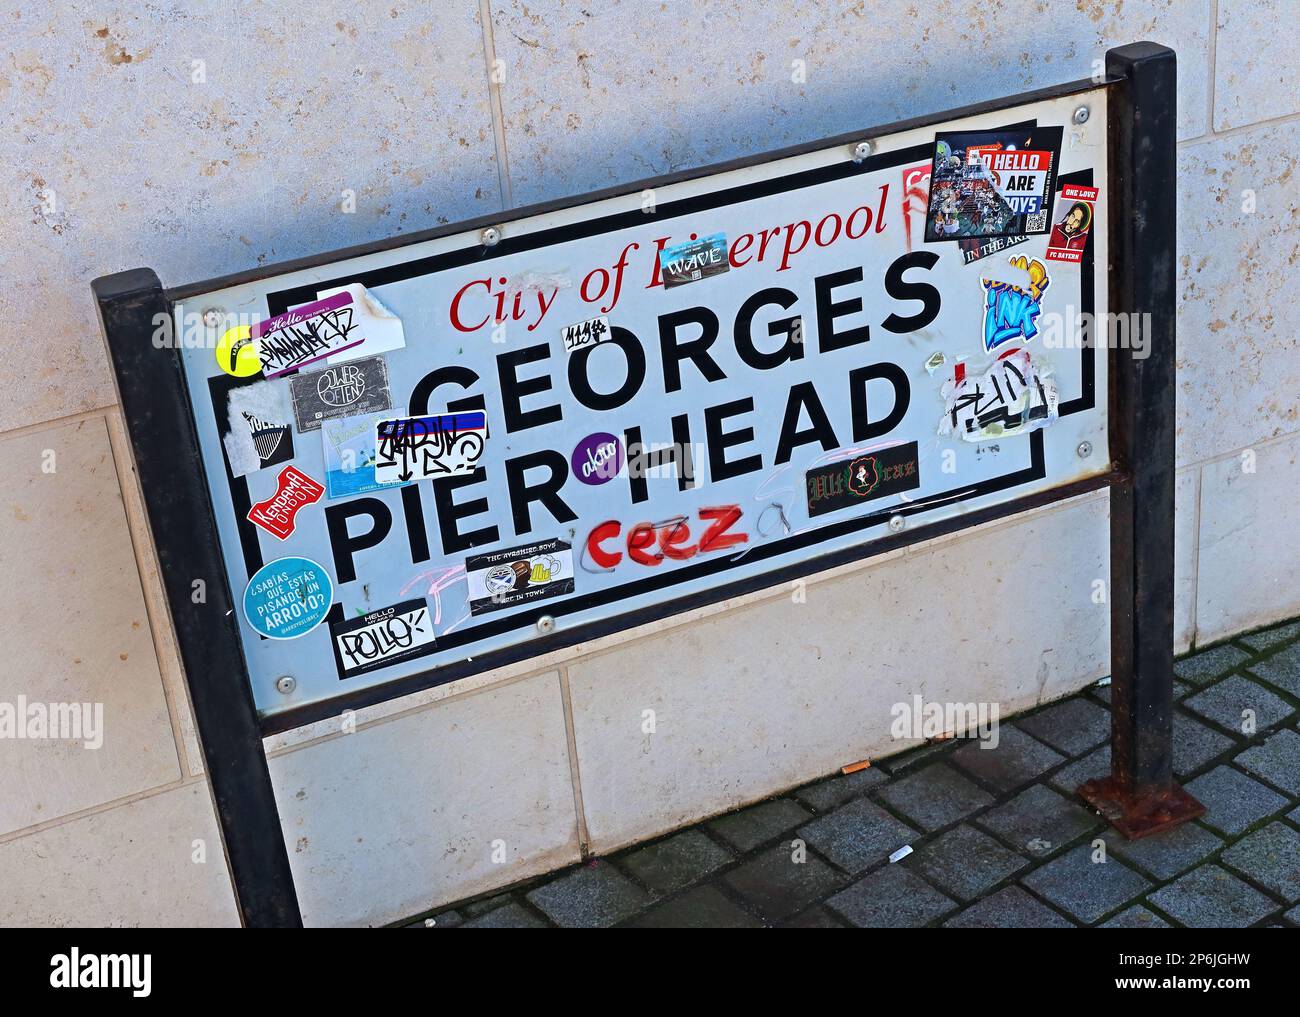 Georges Pier Head, panneau City of Liverpool L3, River Mersey, Merseyside, Angleterre, Royaume-Uni, L3 1DP Banque D'Images